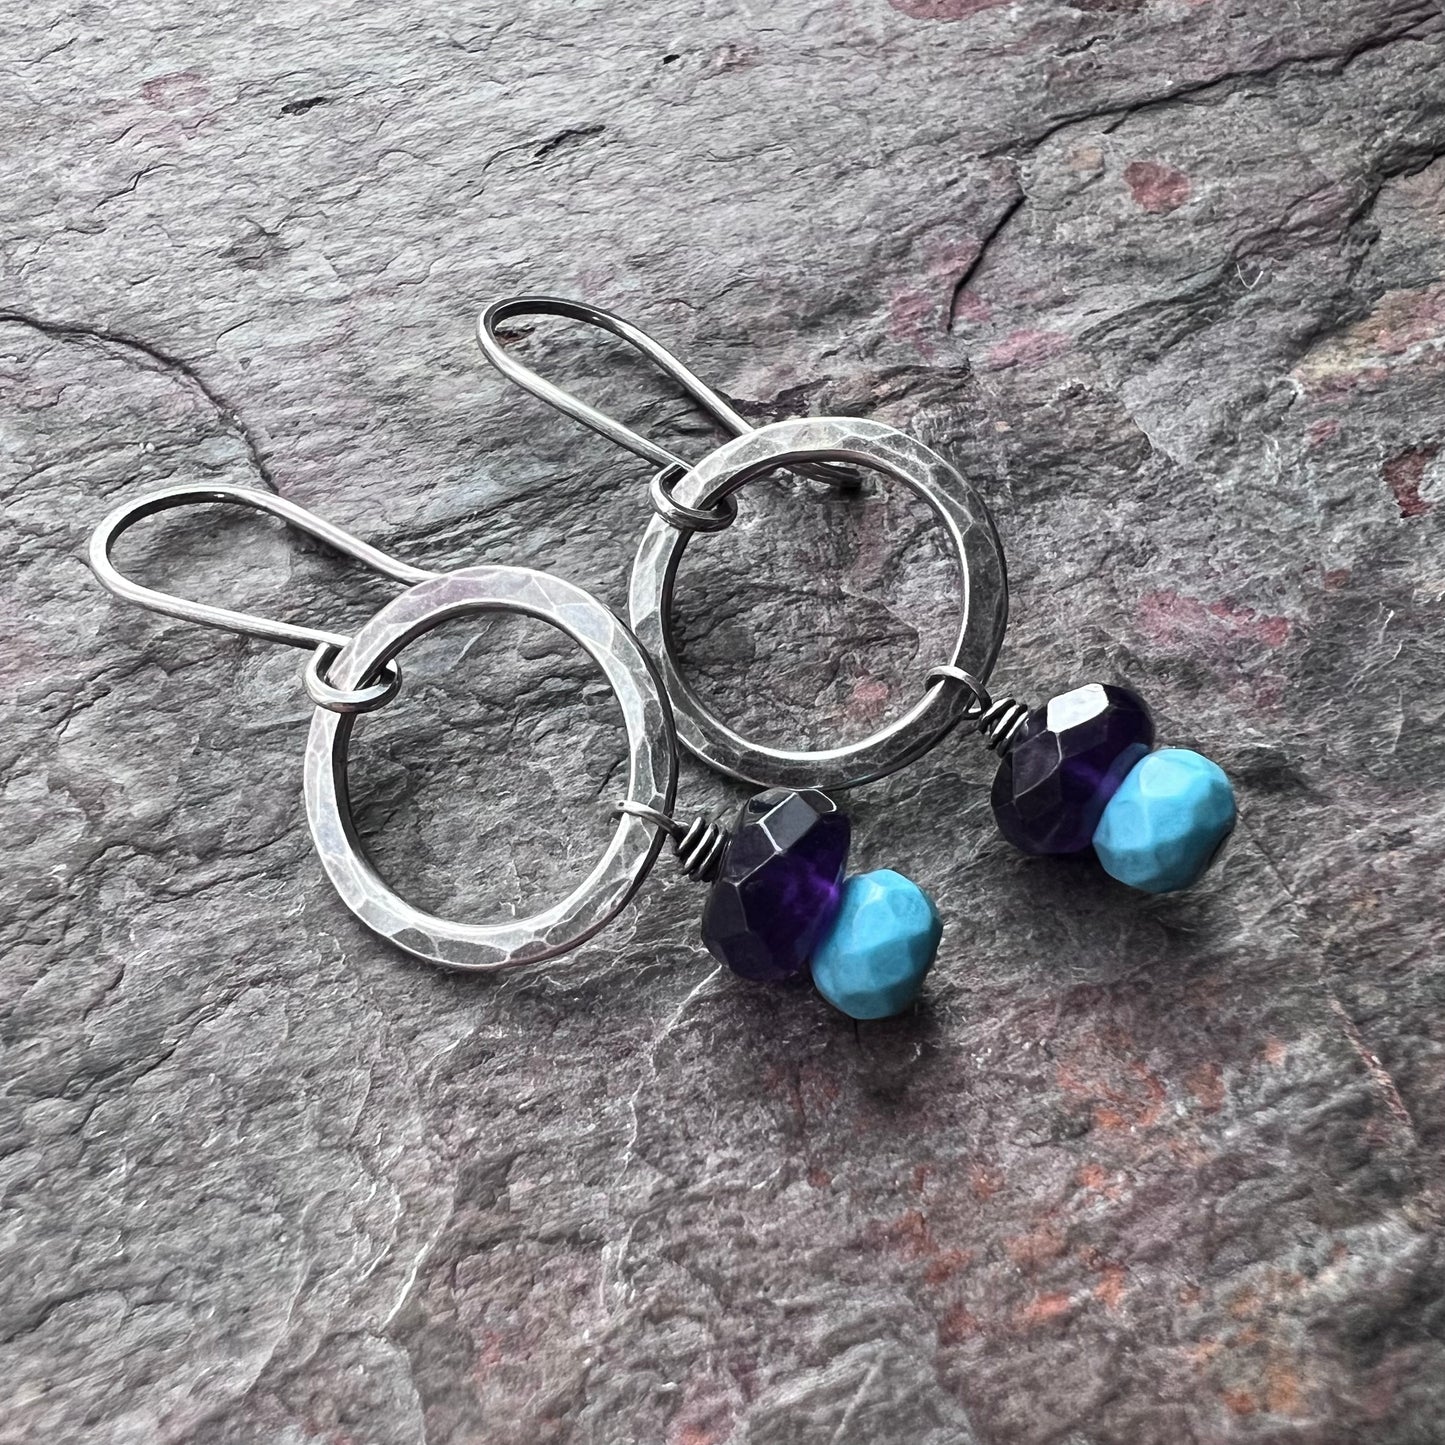 Amethyst and Turquoise Sterling Silver Earrings - Amethyst and Turquoise on Hammered Sterling Silver Rings